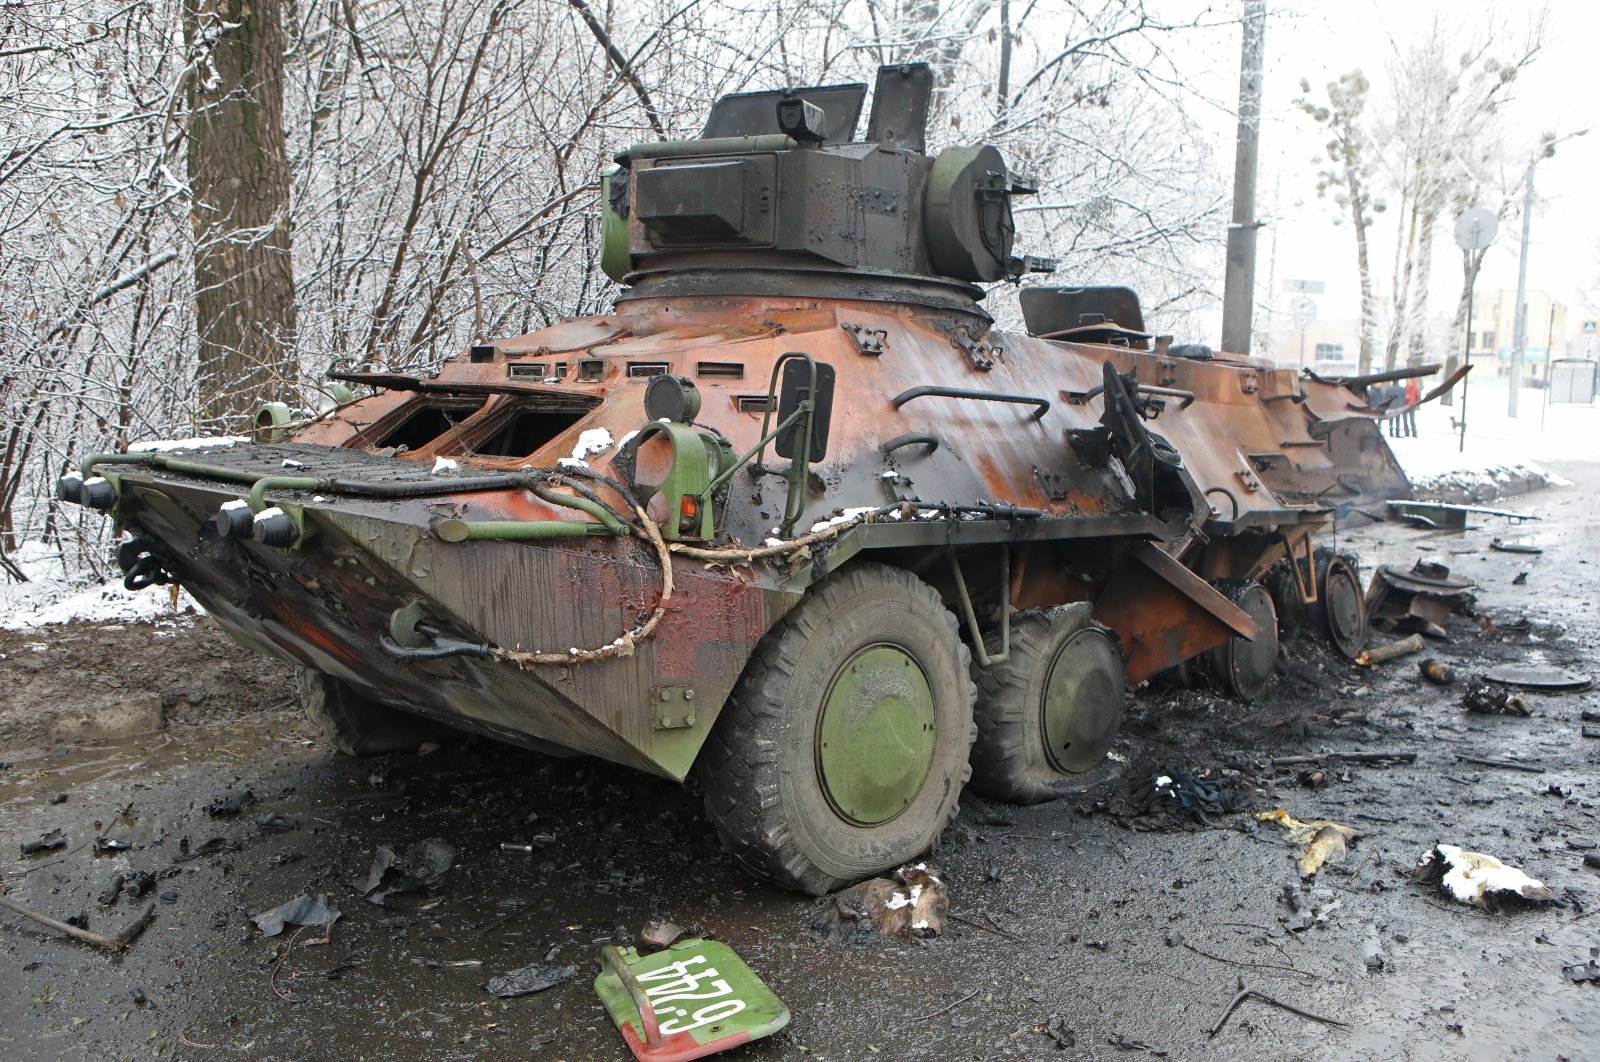 A view shows a destroyed armored personnel carrier (APC) on the roadside in Kharkiv, Ukraine, Feb. 26, 2022. (Reuters Photo)